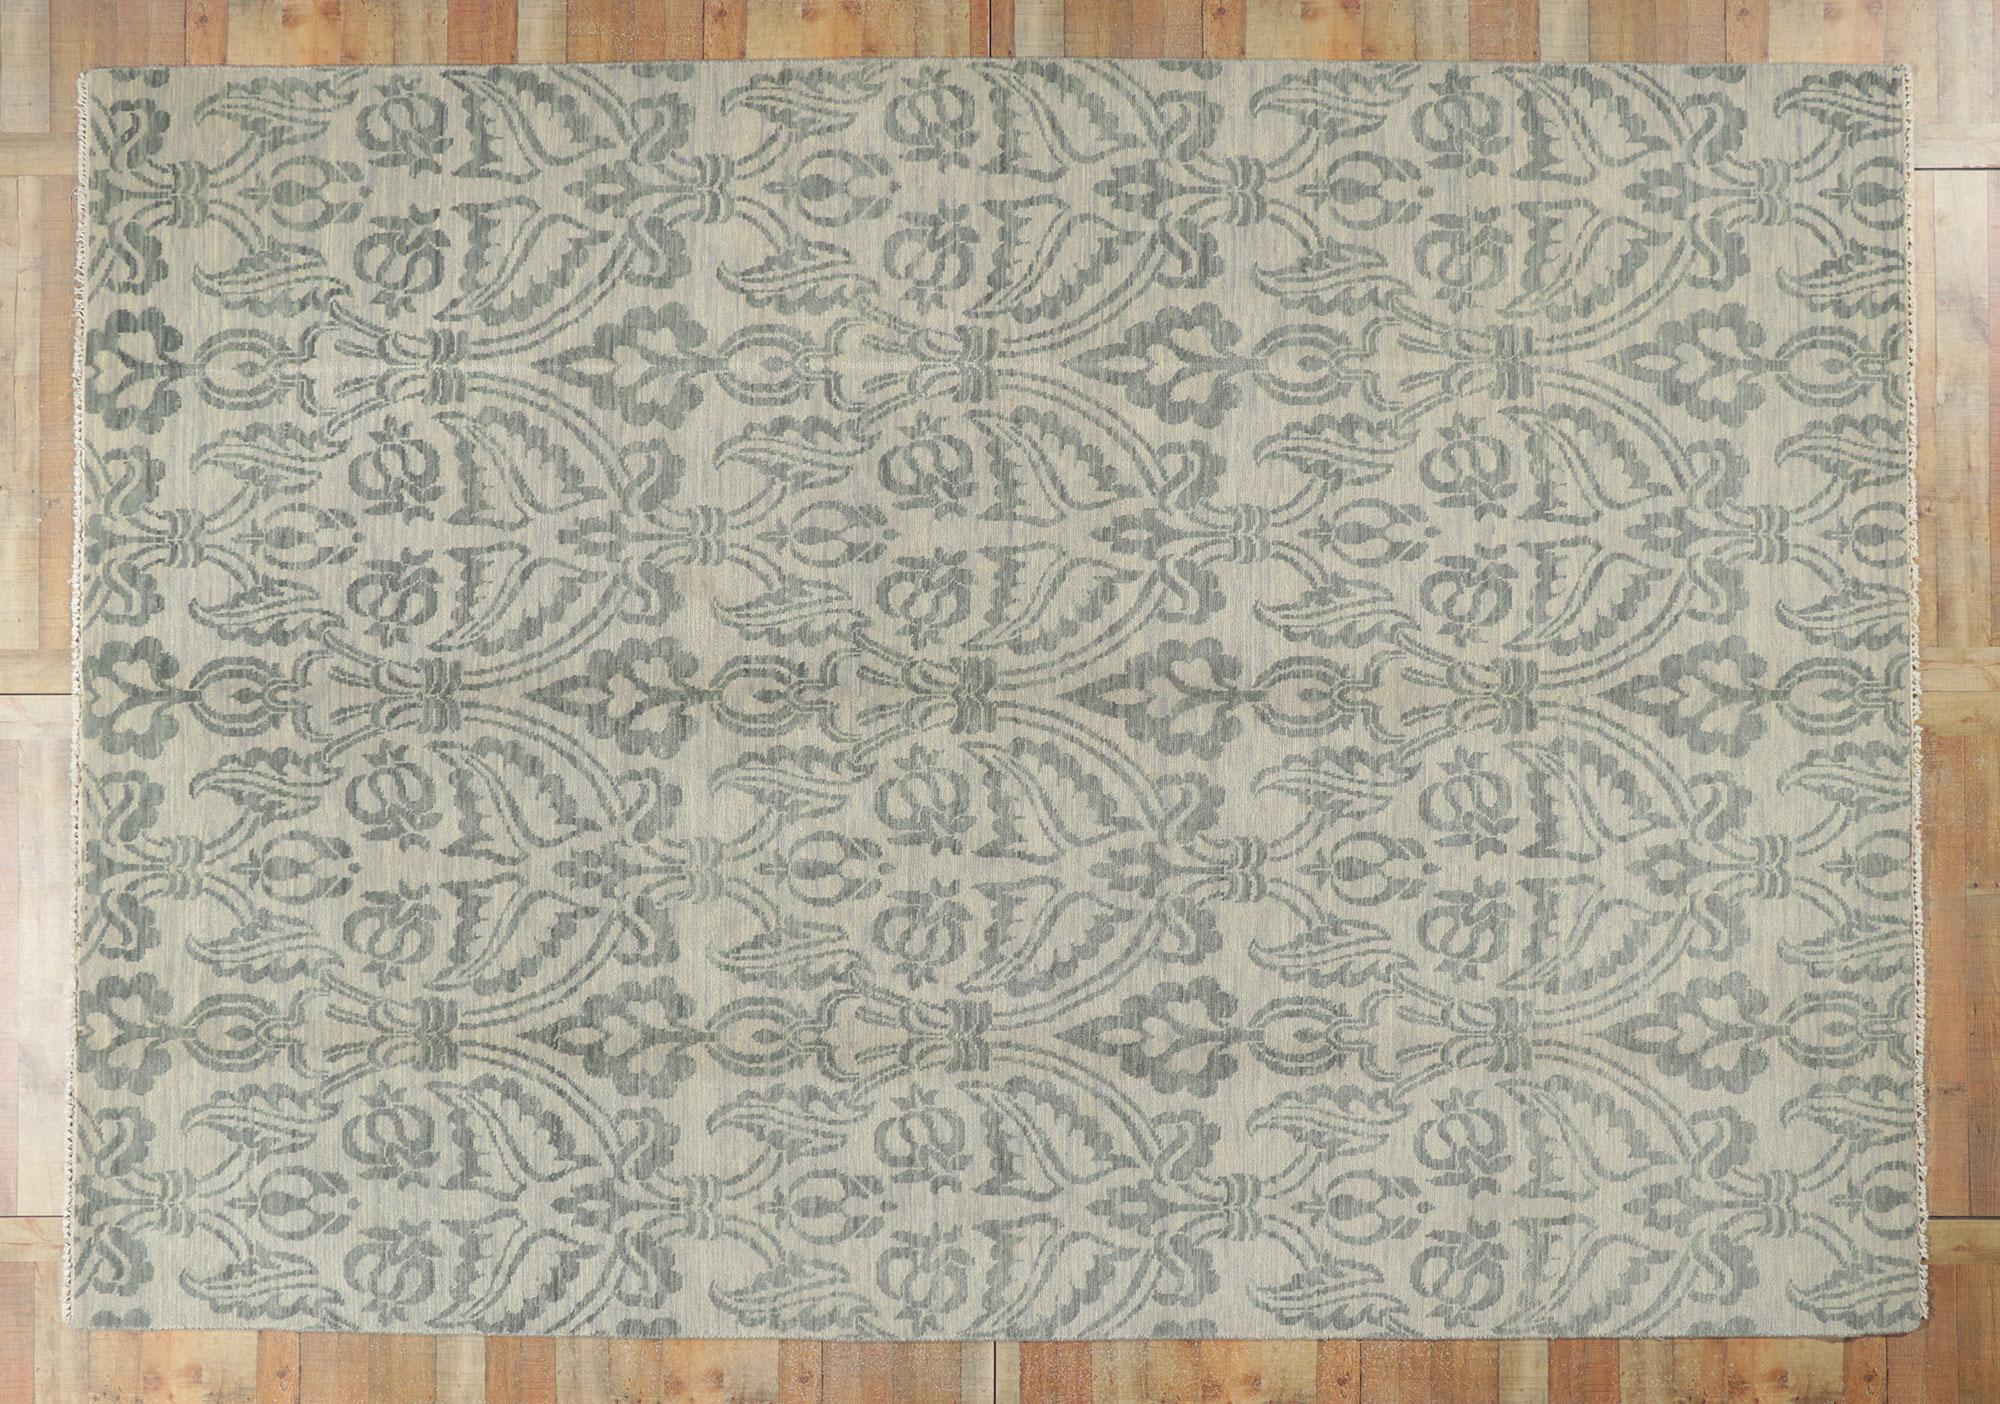 New Transitional Damask Ikat Rug with Blue and Gray Earth-Tone Colors For Sale 1